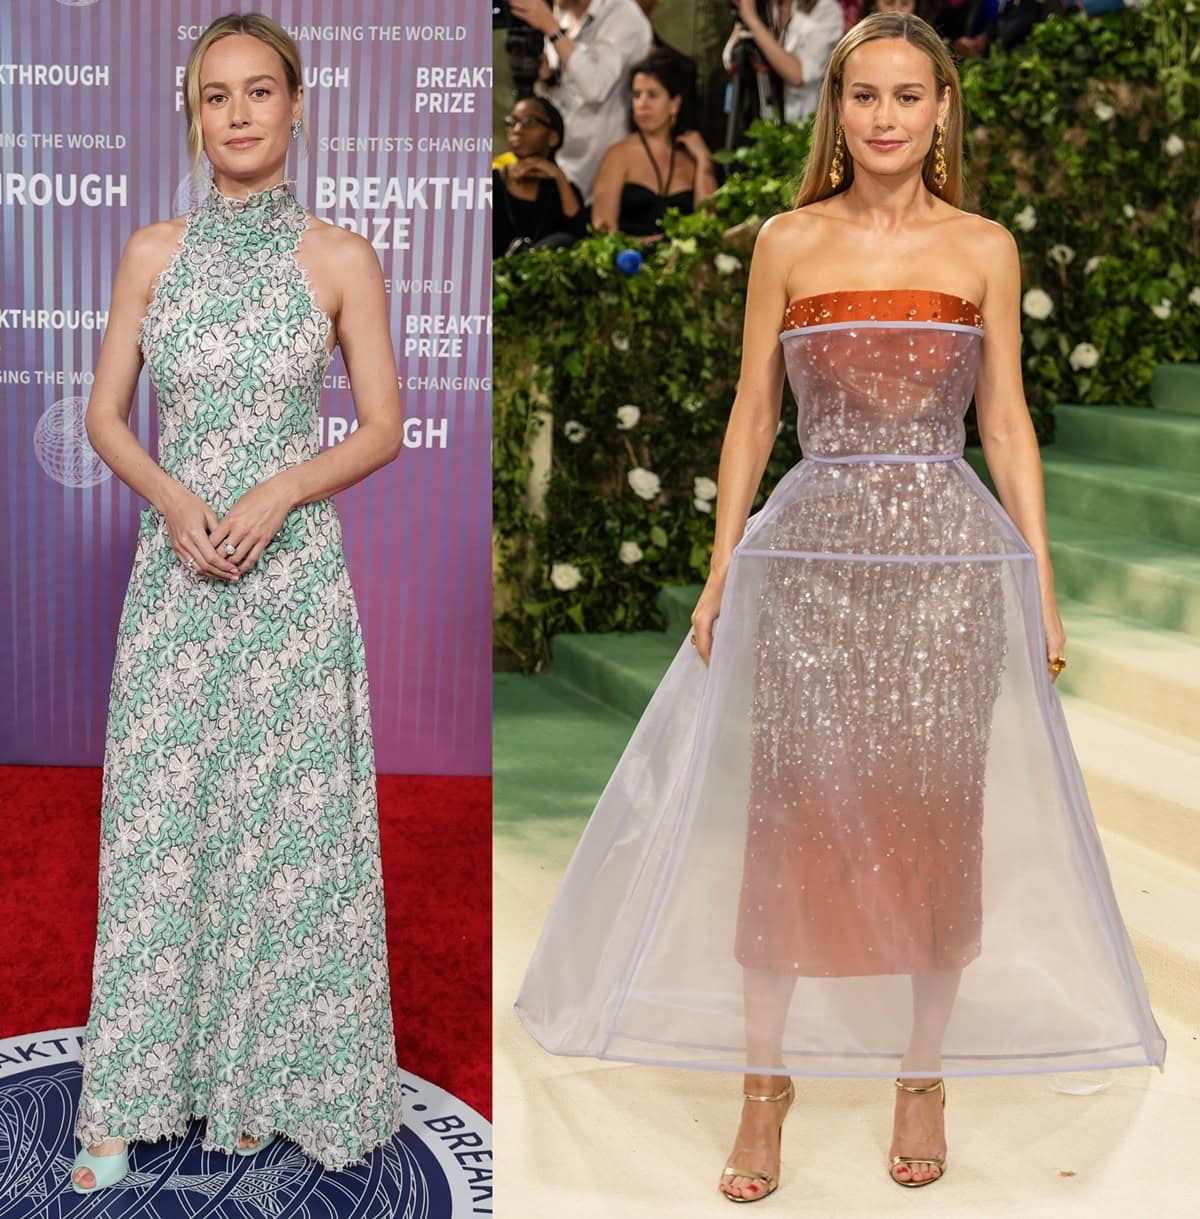 Brie Larson showcases her versatile fashion sense, transitioning from a spring-inspired pastel floral Chanel gown at the Breakthrough Prize Ceremony to a captivating Prada ensemble with a sparkling gradient at the Met Gala